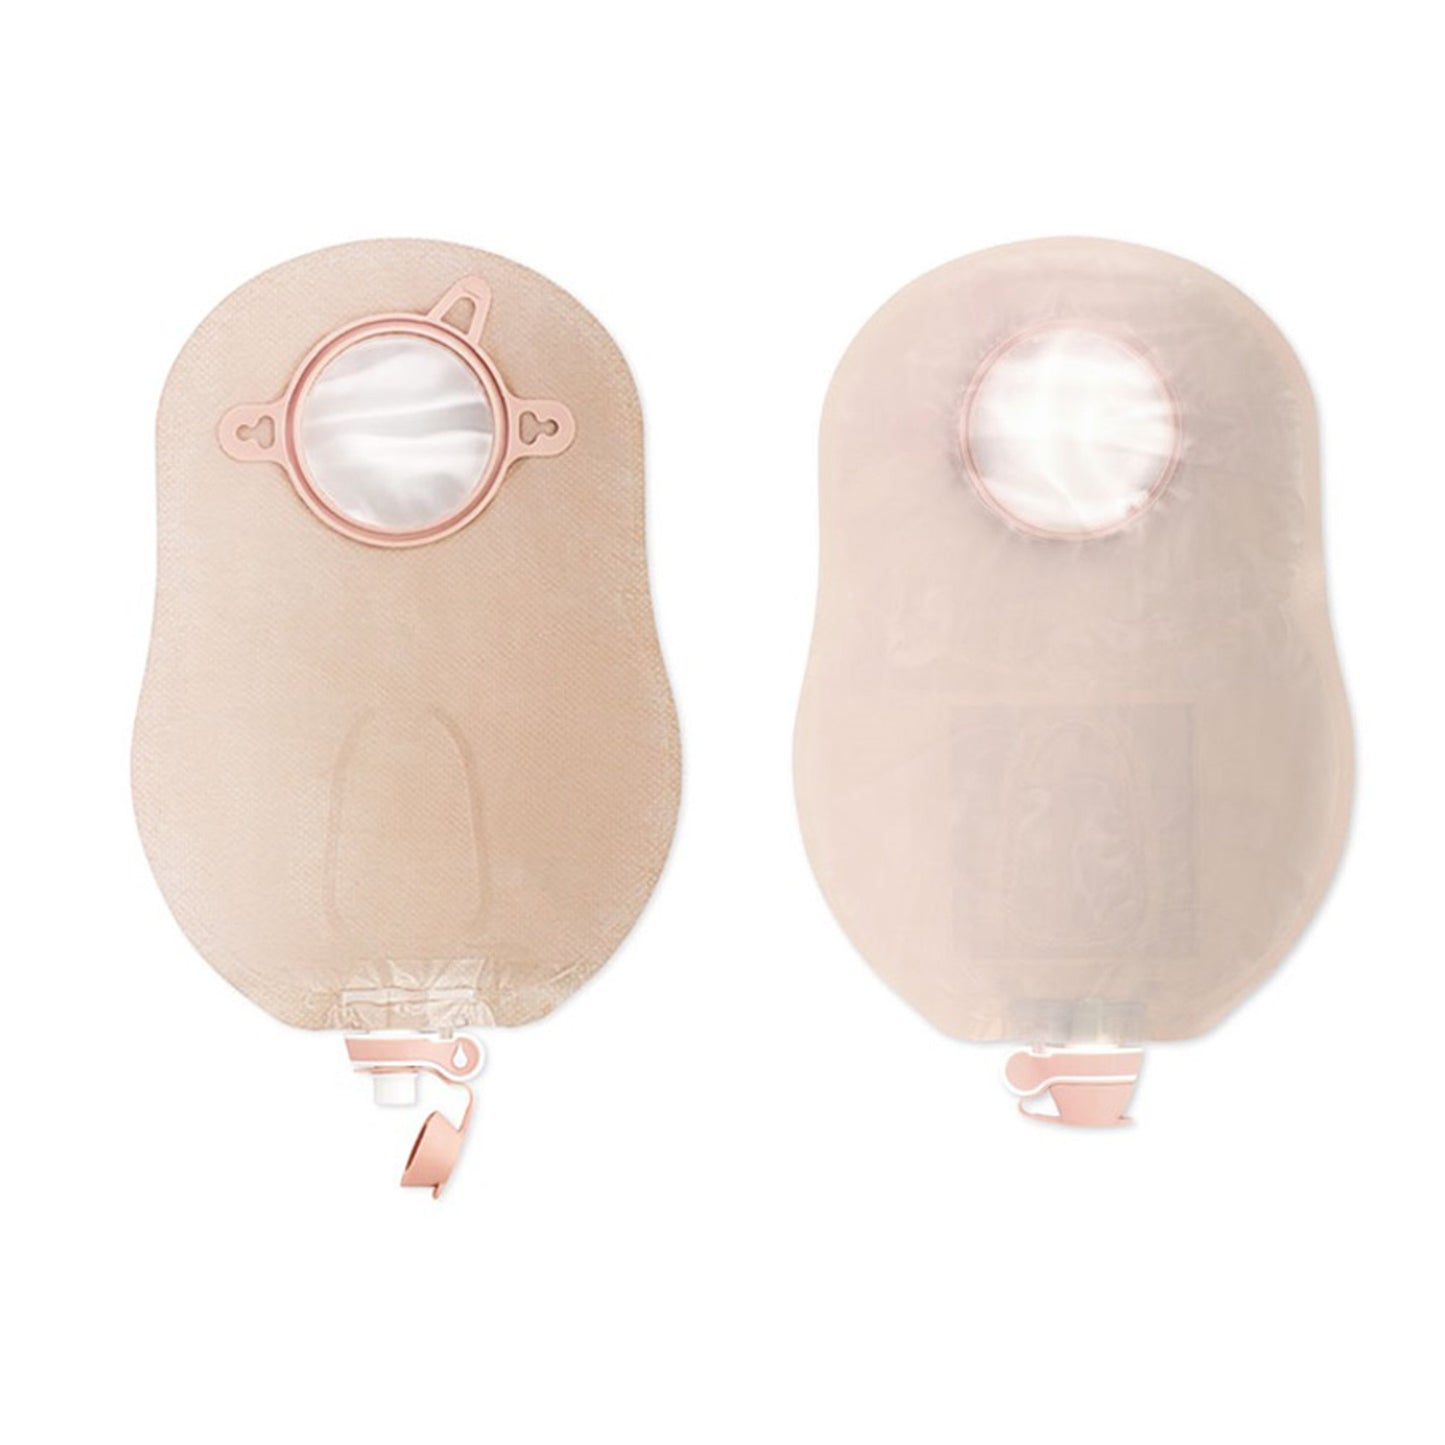 New Image™ Two-Piece Ultra-Clear Urostomy Pouch, 9 Inch Length, 2.25 Inch Flange, 10 ct